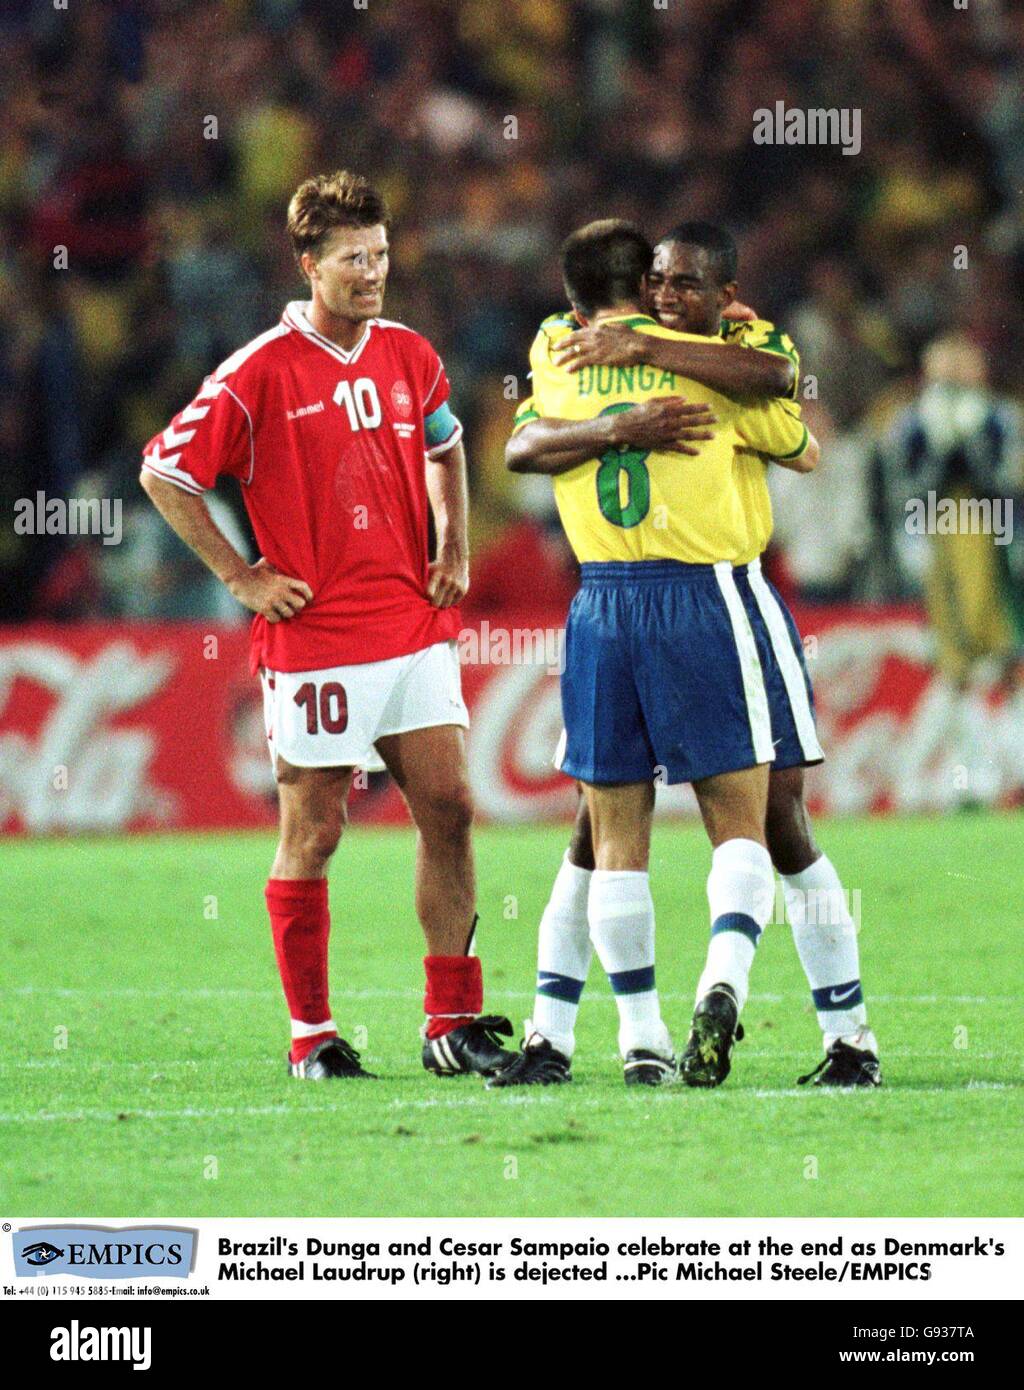 Brazil's Dunga (centre) and Cesar Sampaio (right) celebrate at the end of the game as Denmark's Michael Laudrup (right) is dejected Stock Photo